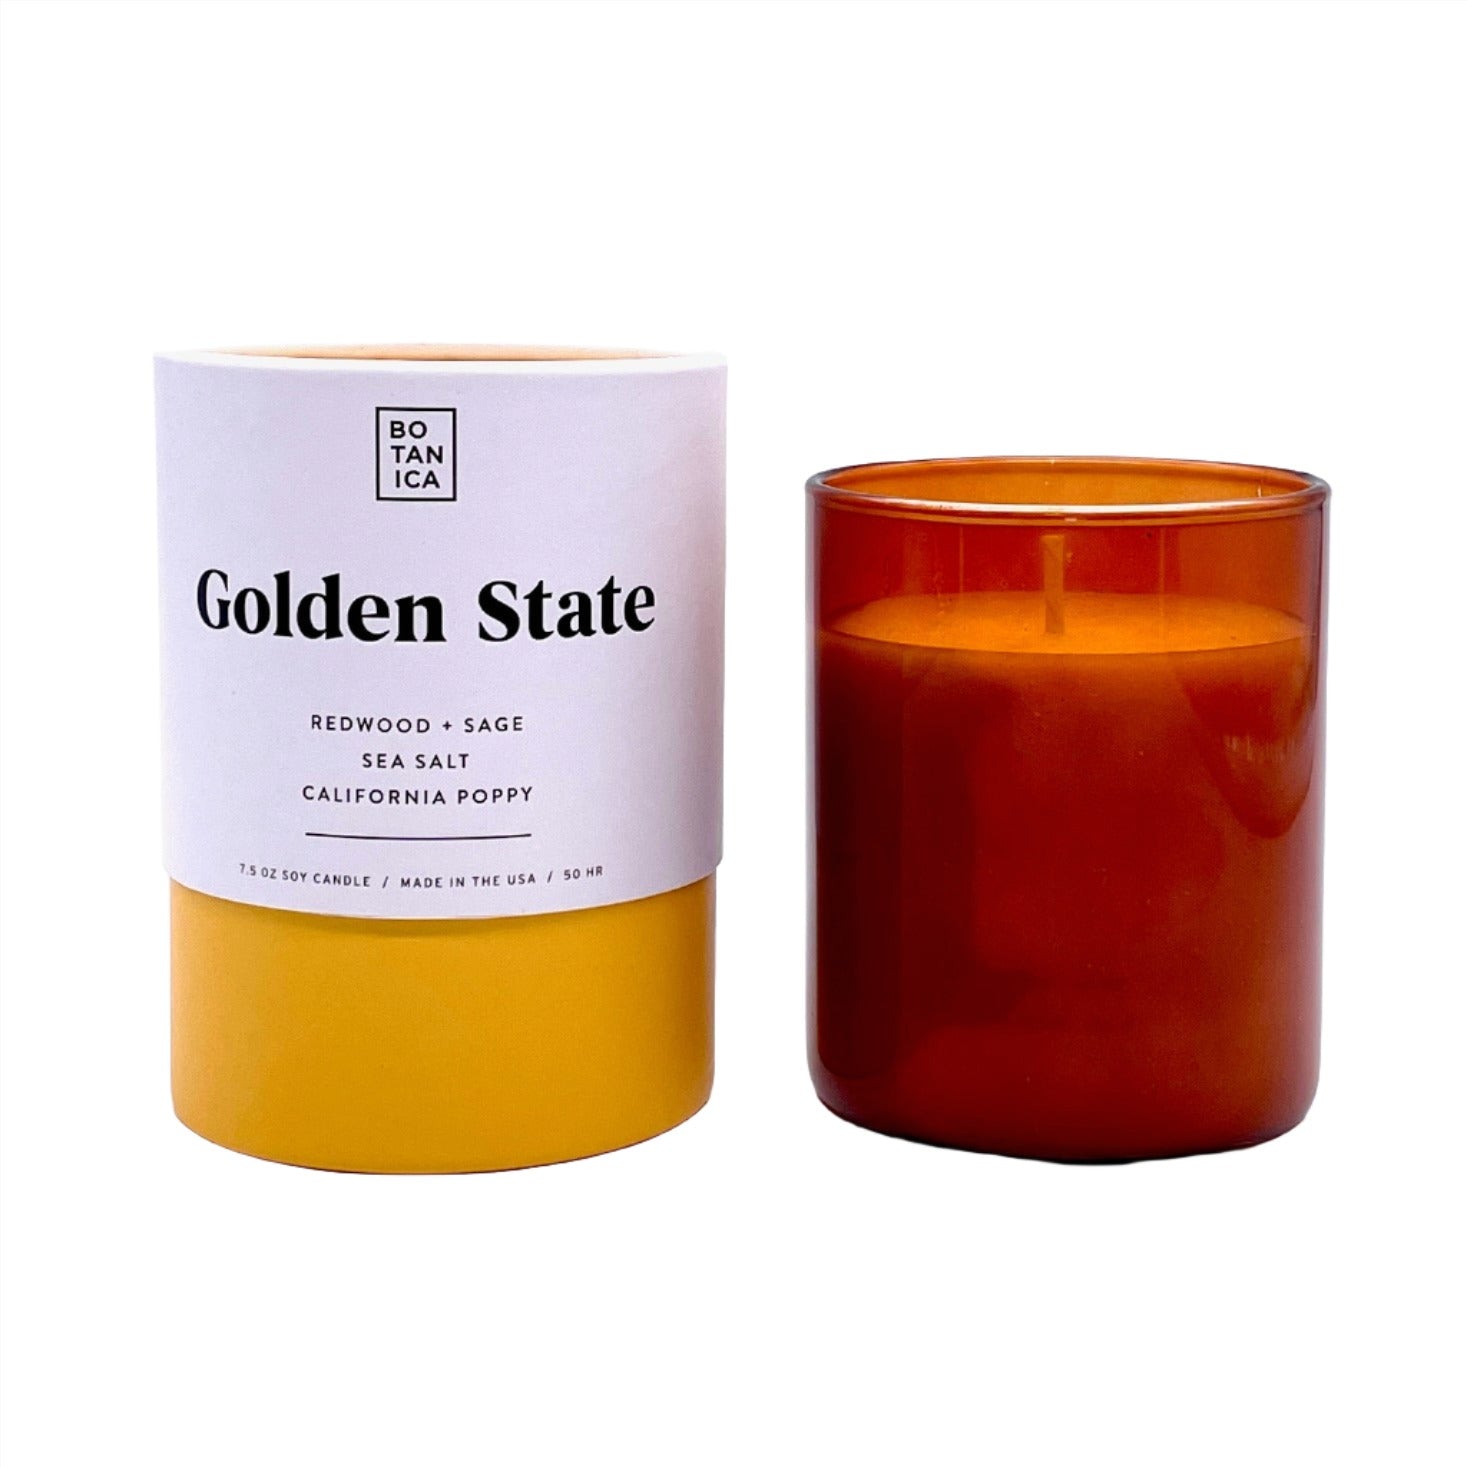 Amber Glass Candle next to White & Yellow Tube Package with Black Text